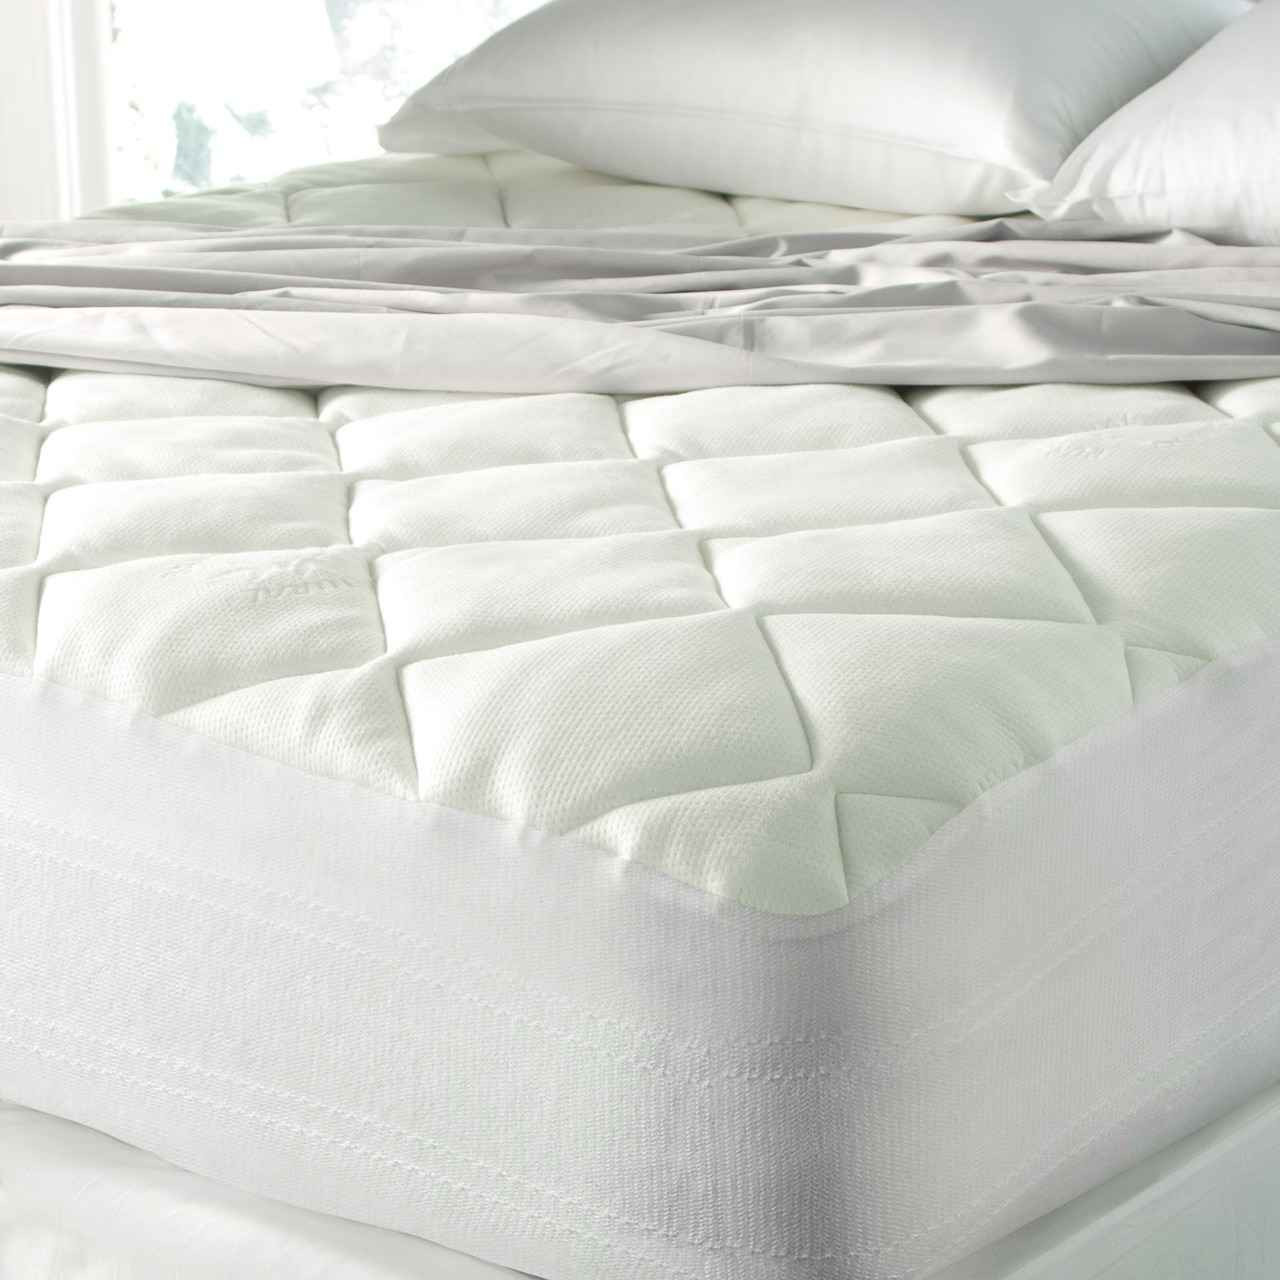 https://cdn11.bigcommerce.com/s-j8lceuq/products/97/images/3405/spa-luxe-spa-luxe-super-plush-bamboo-blend-top-cool-touch-mattress-pad__50740.1649859806.1280.1280.jpg?c=2